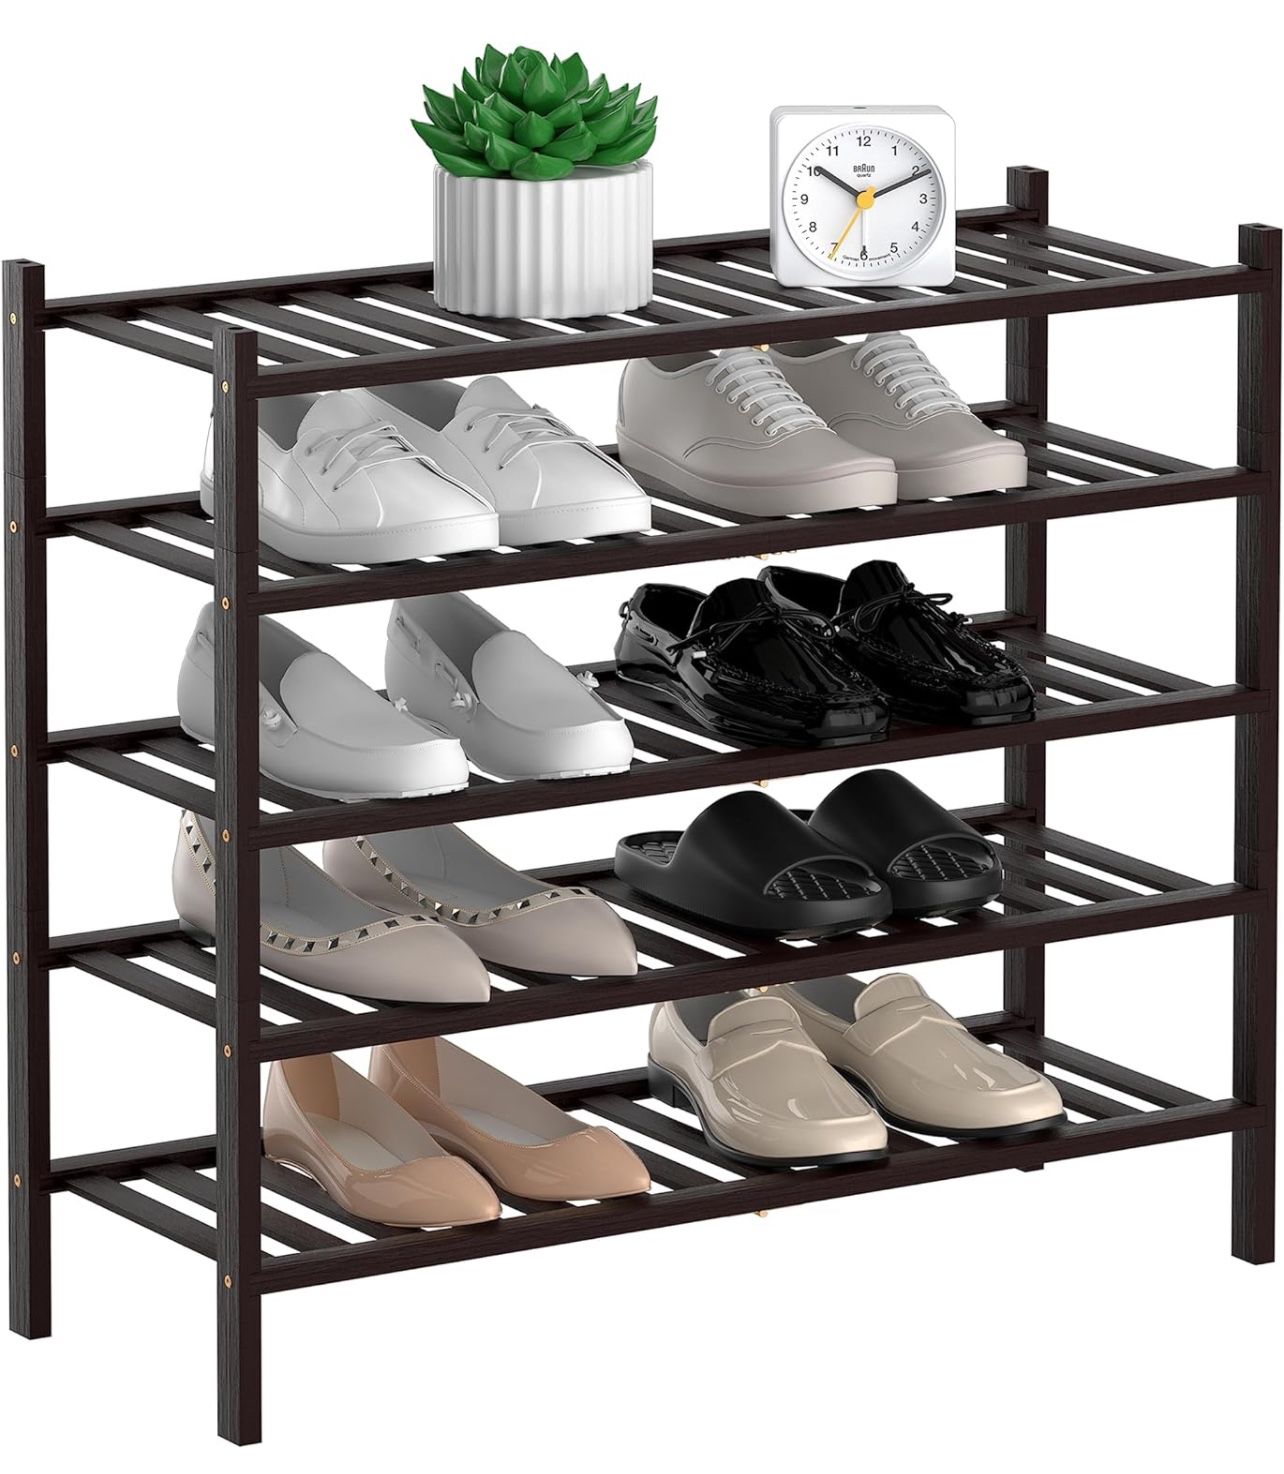 5-Tier Natural Bamboo Shoe Rack - Stackable Storage Shelf with Multi-Function Combinations - Free Standing Shoe Racks for Convenient Shoe Organization